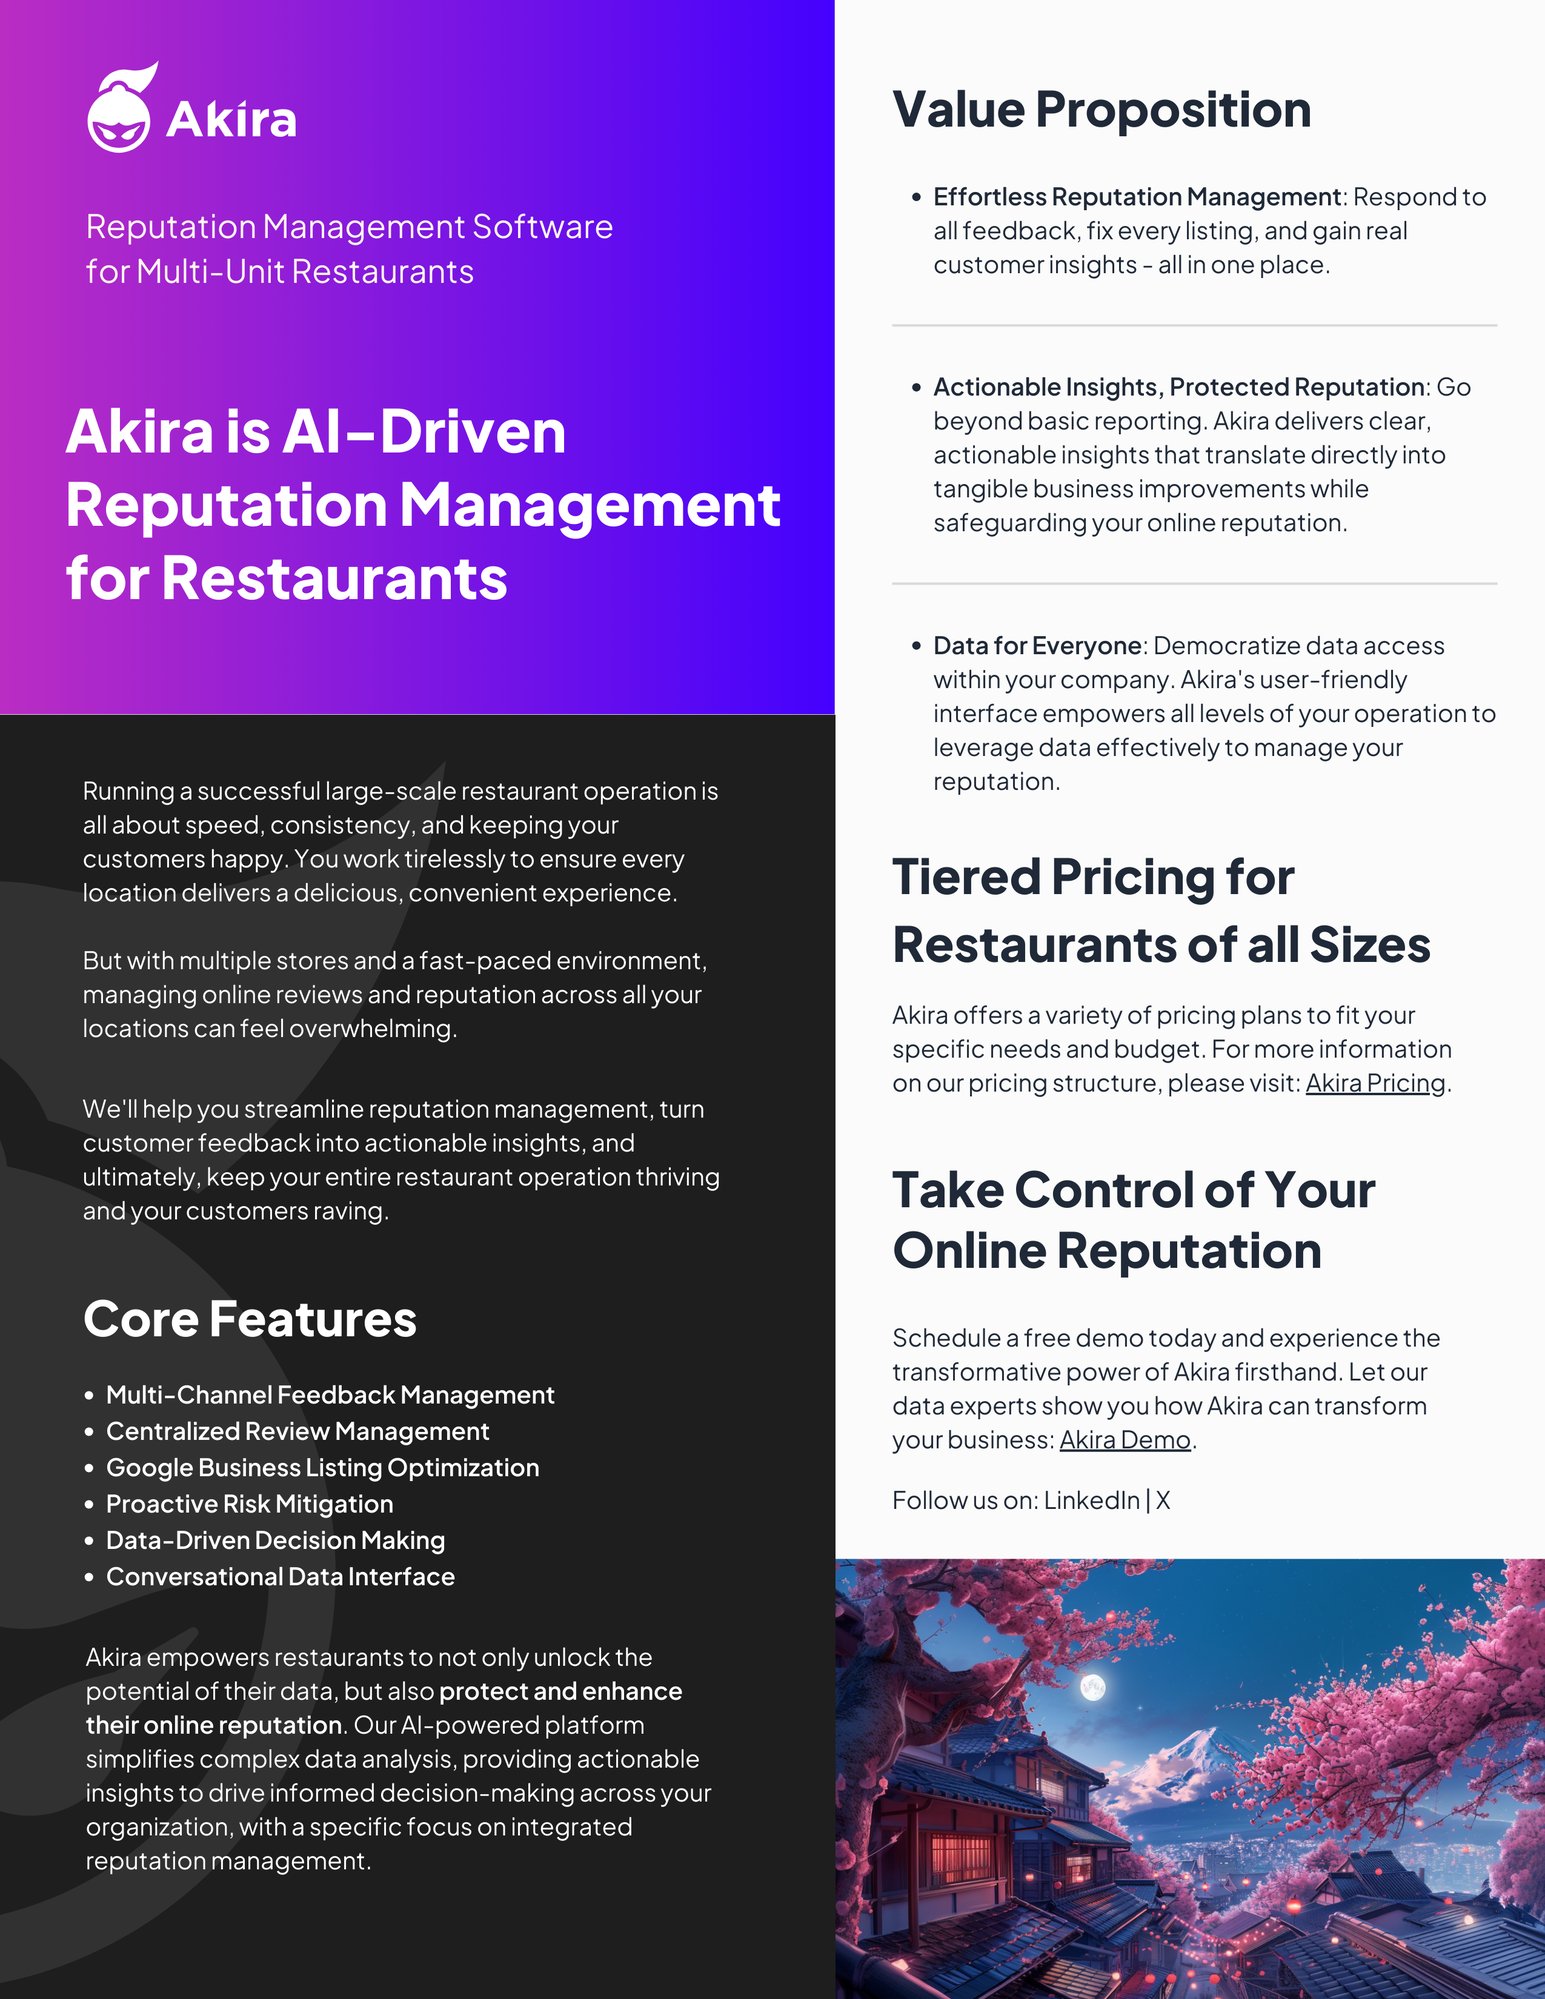 Unleash the Power of AI-Driven Reputation Management with Akira